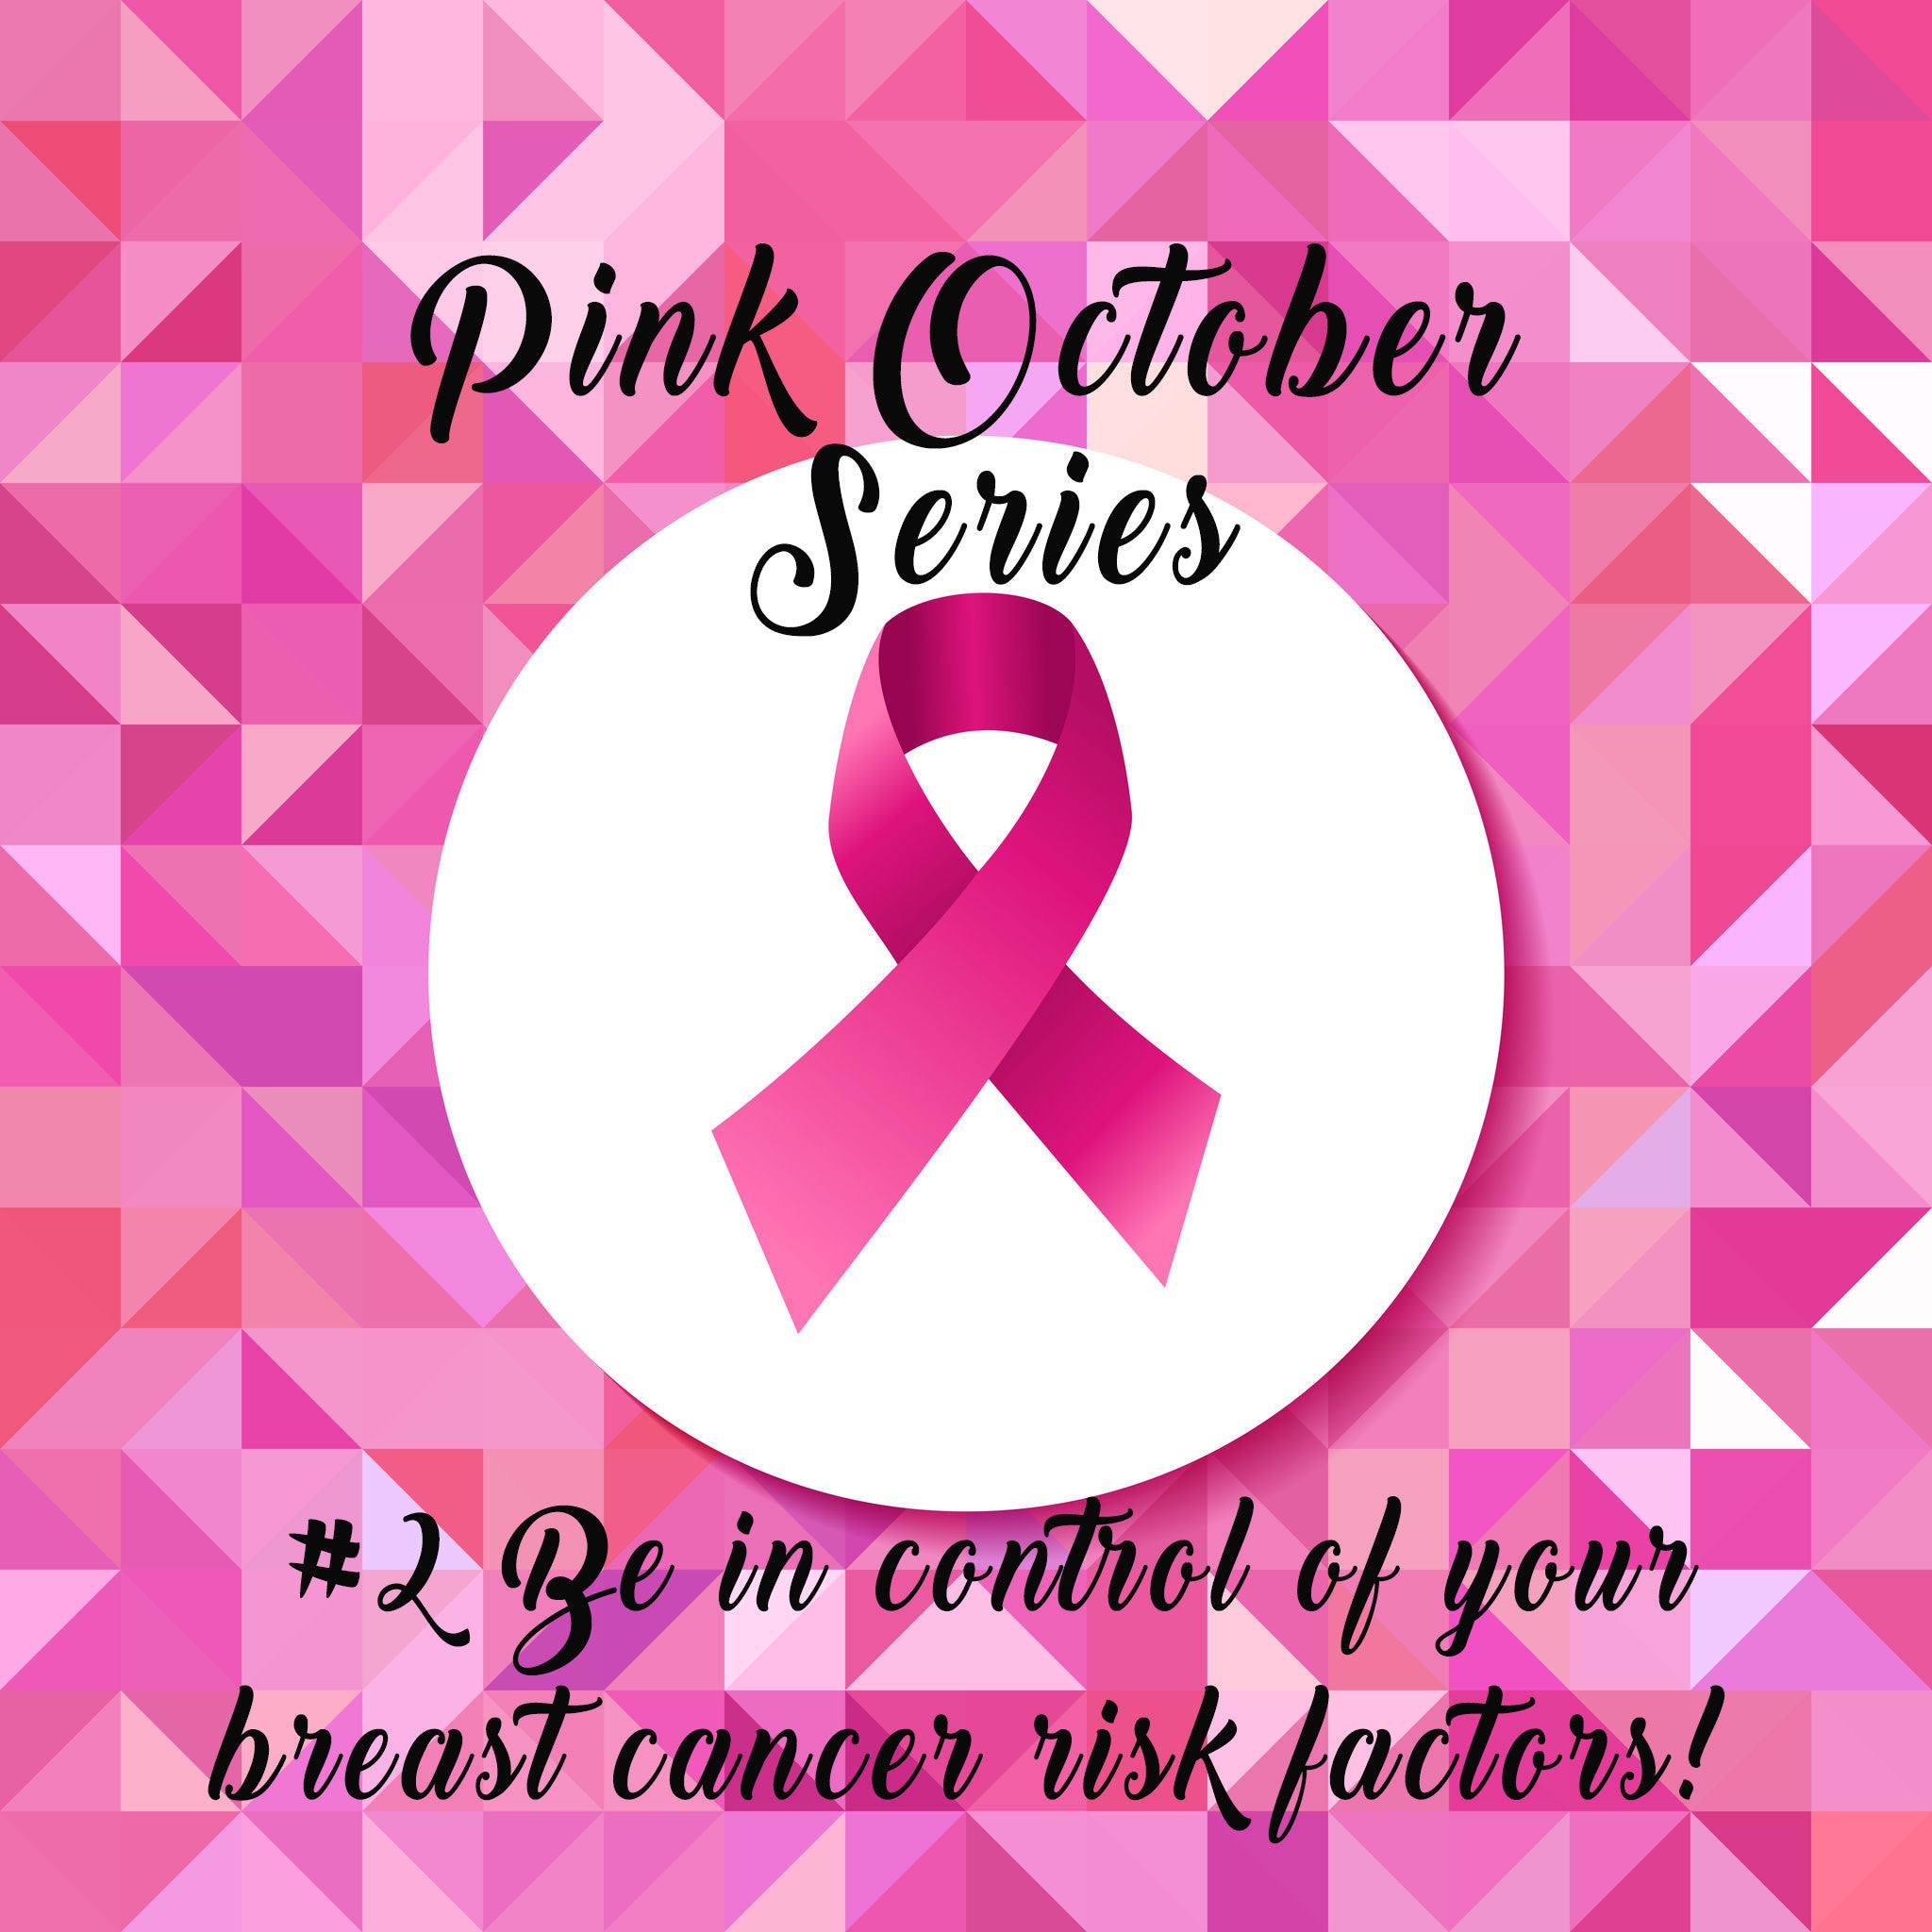 Pink October Series: Can I control my breast cancer risk factors?